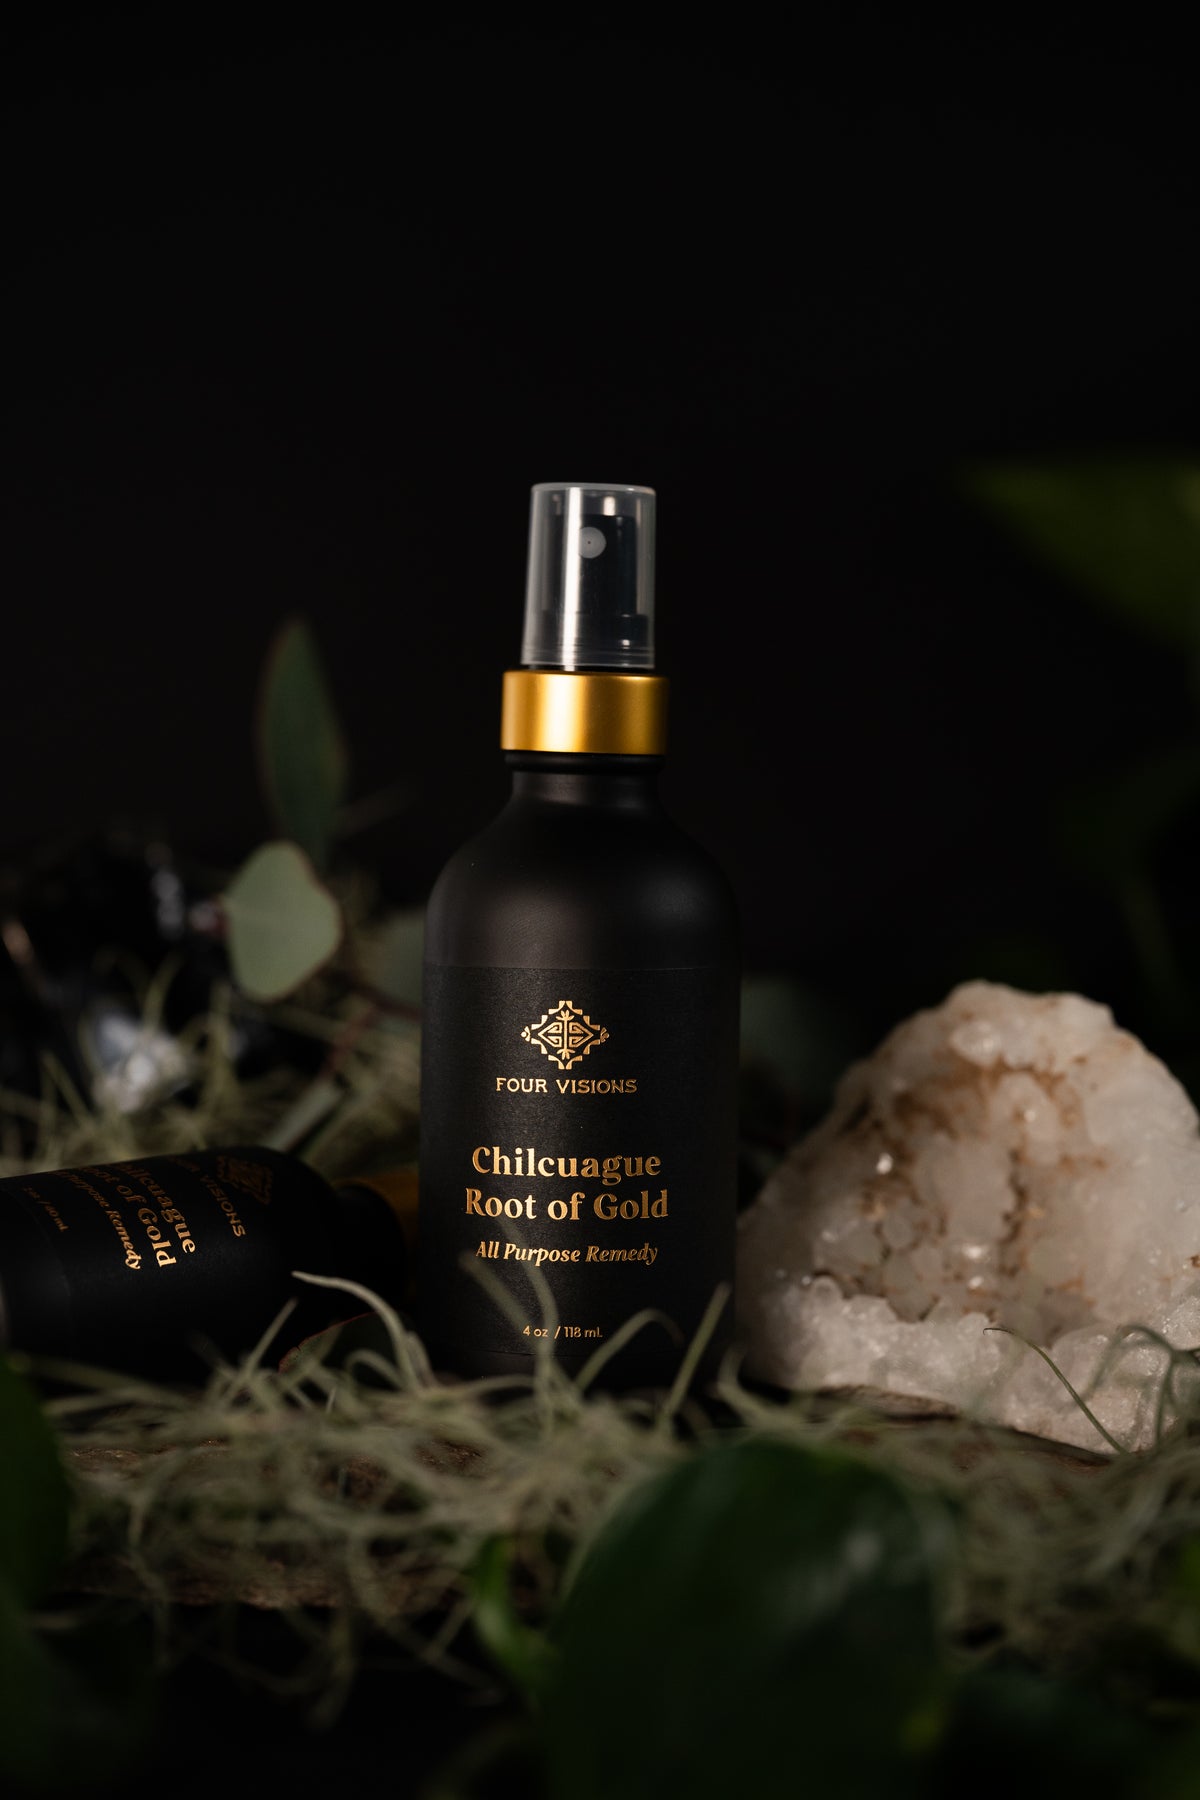 Chilcuague Root of Gold Healing Spray